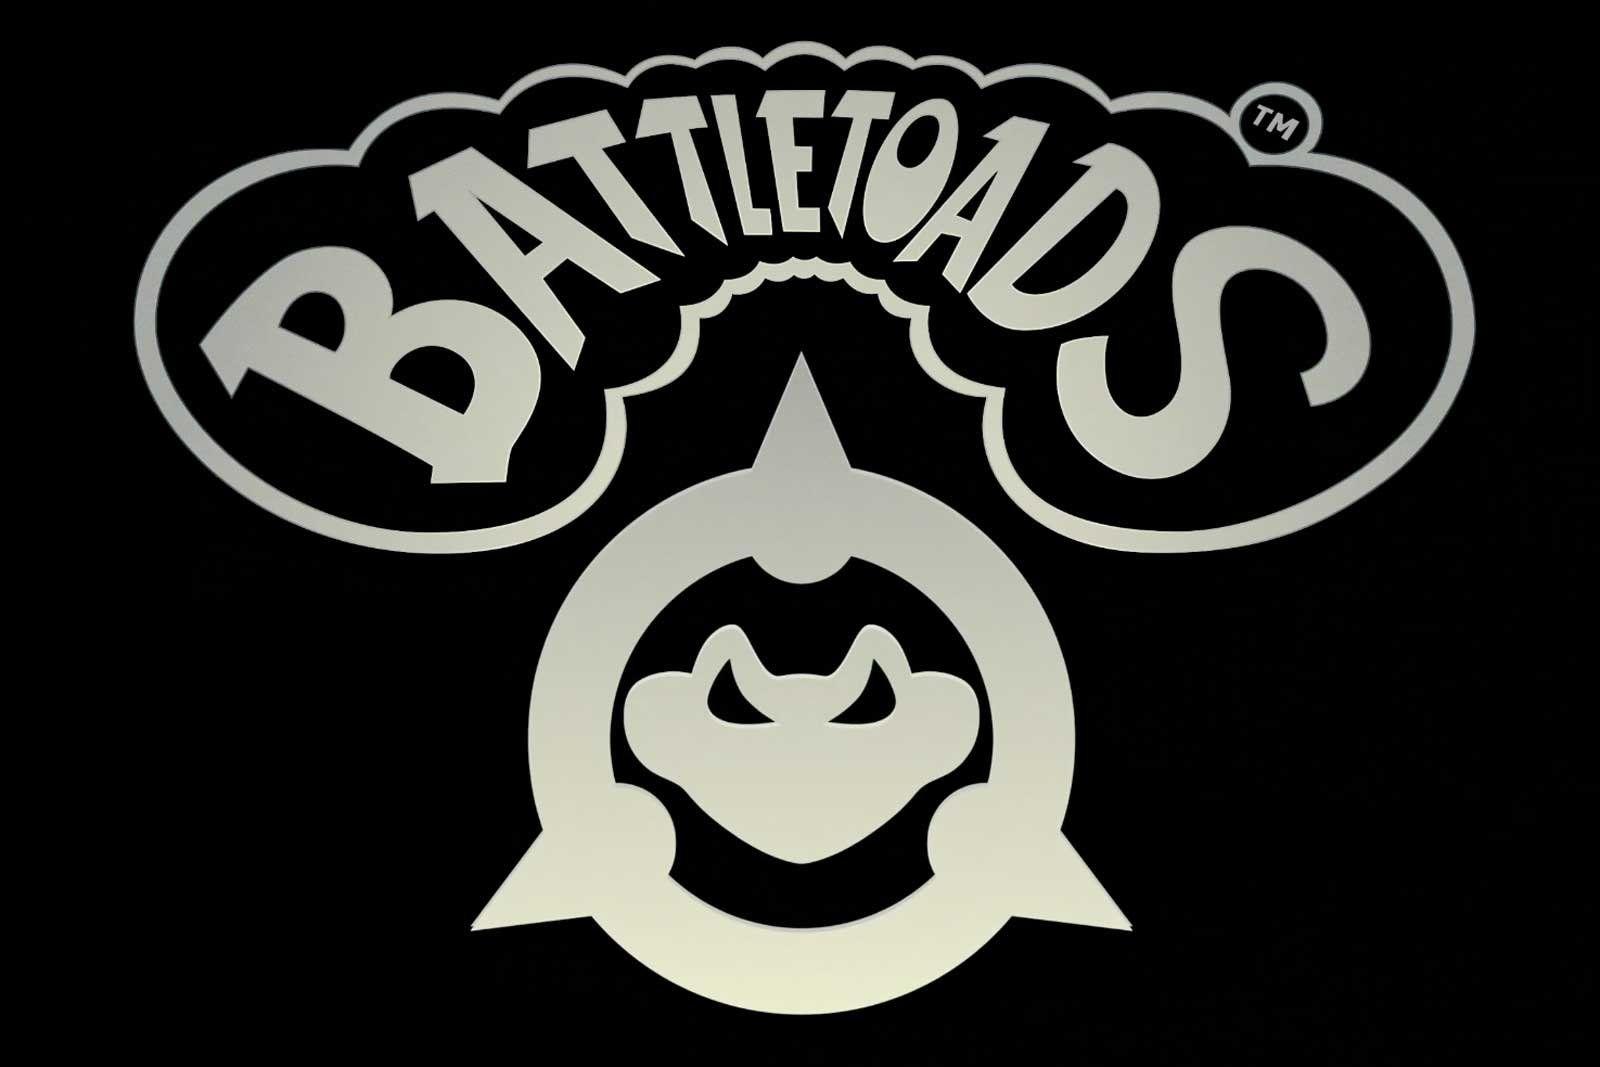 Battletoads Logo - A new 'Battletoads' game is coming to Xbox One in 2019